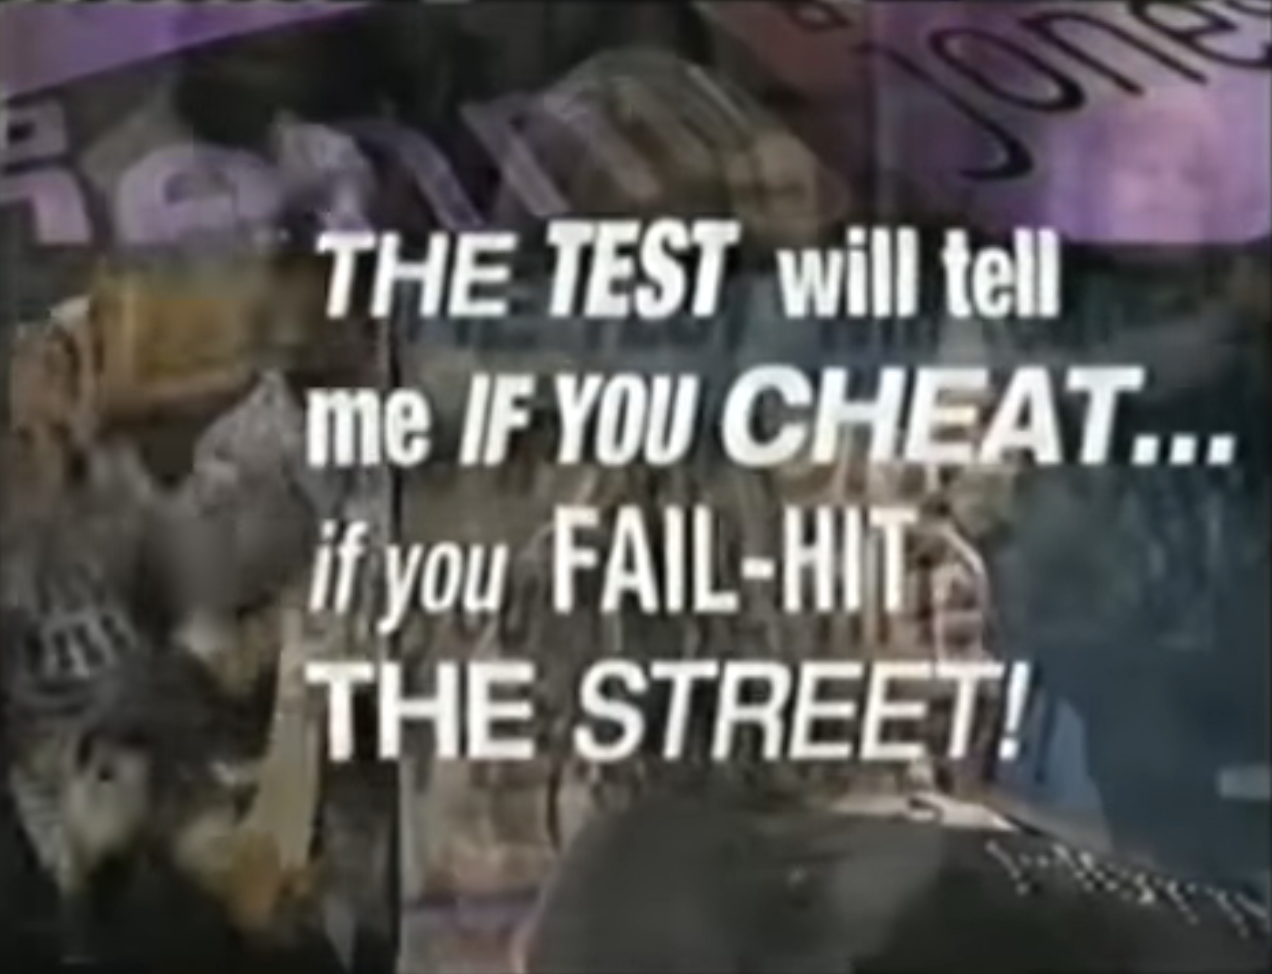 &quot;The test will tell me if you cheat... if you fail-hit the street&quot;